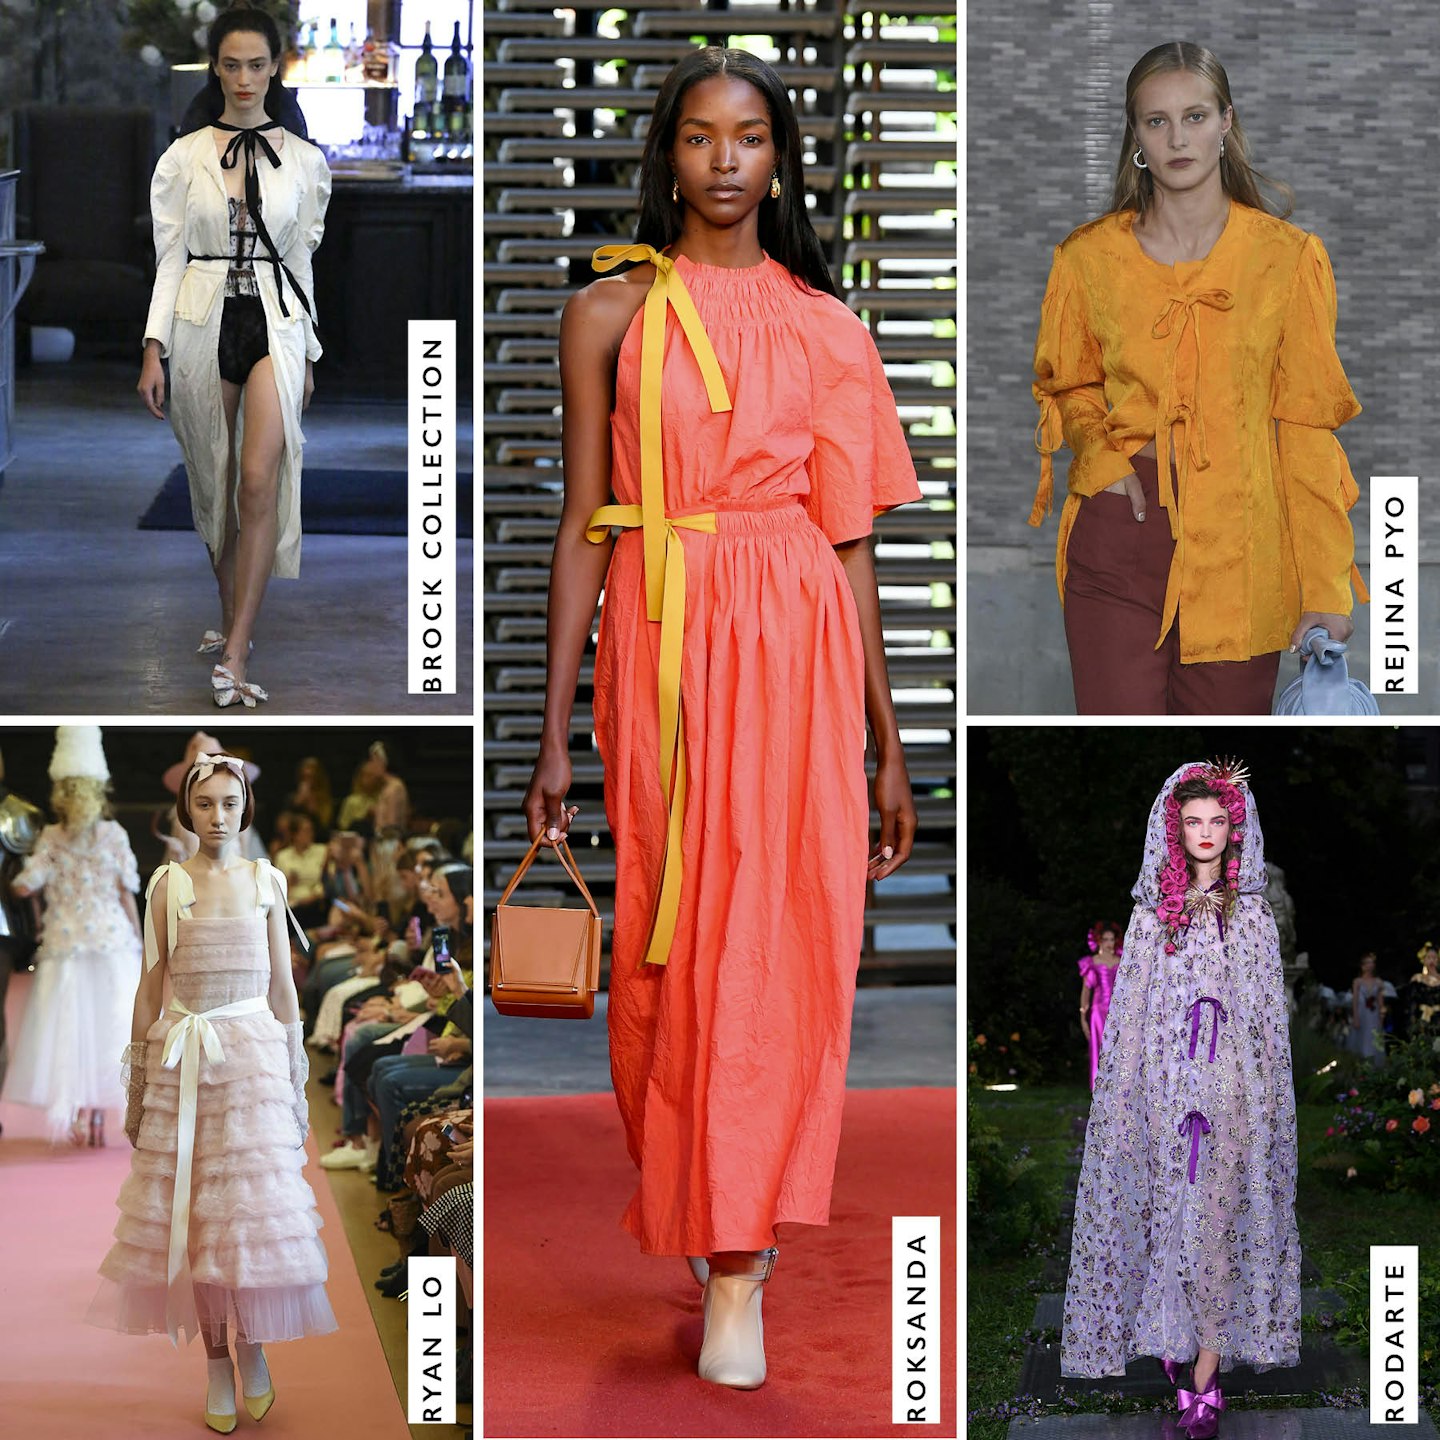 spring summer 2019 ss19 trends bows